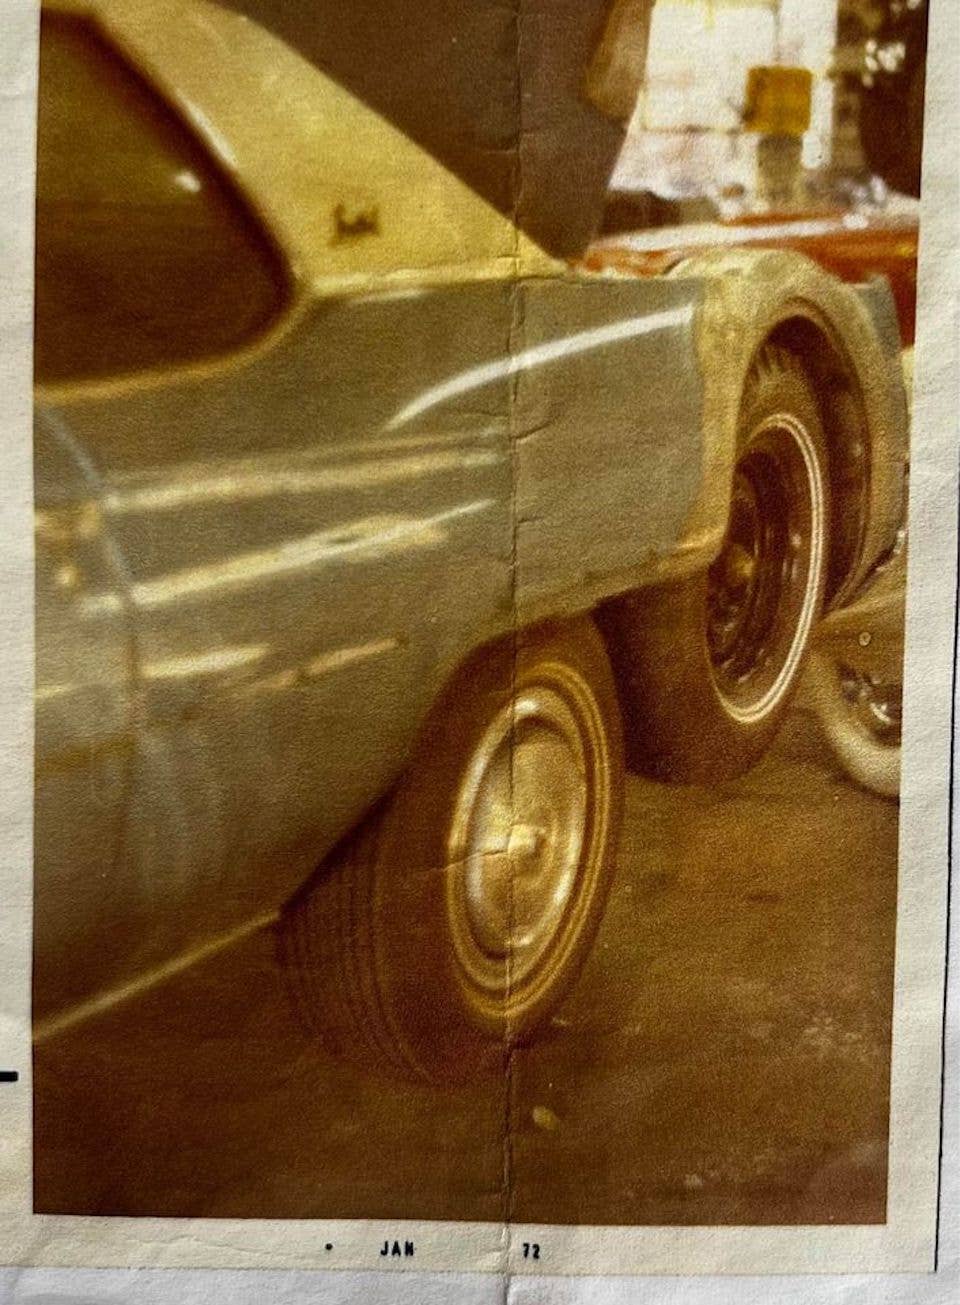 January 1972 dated photo of the Buick's third axle